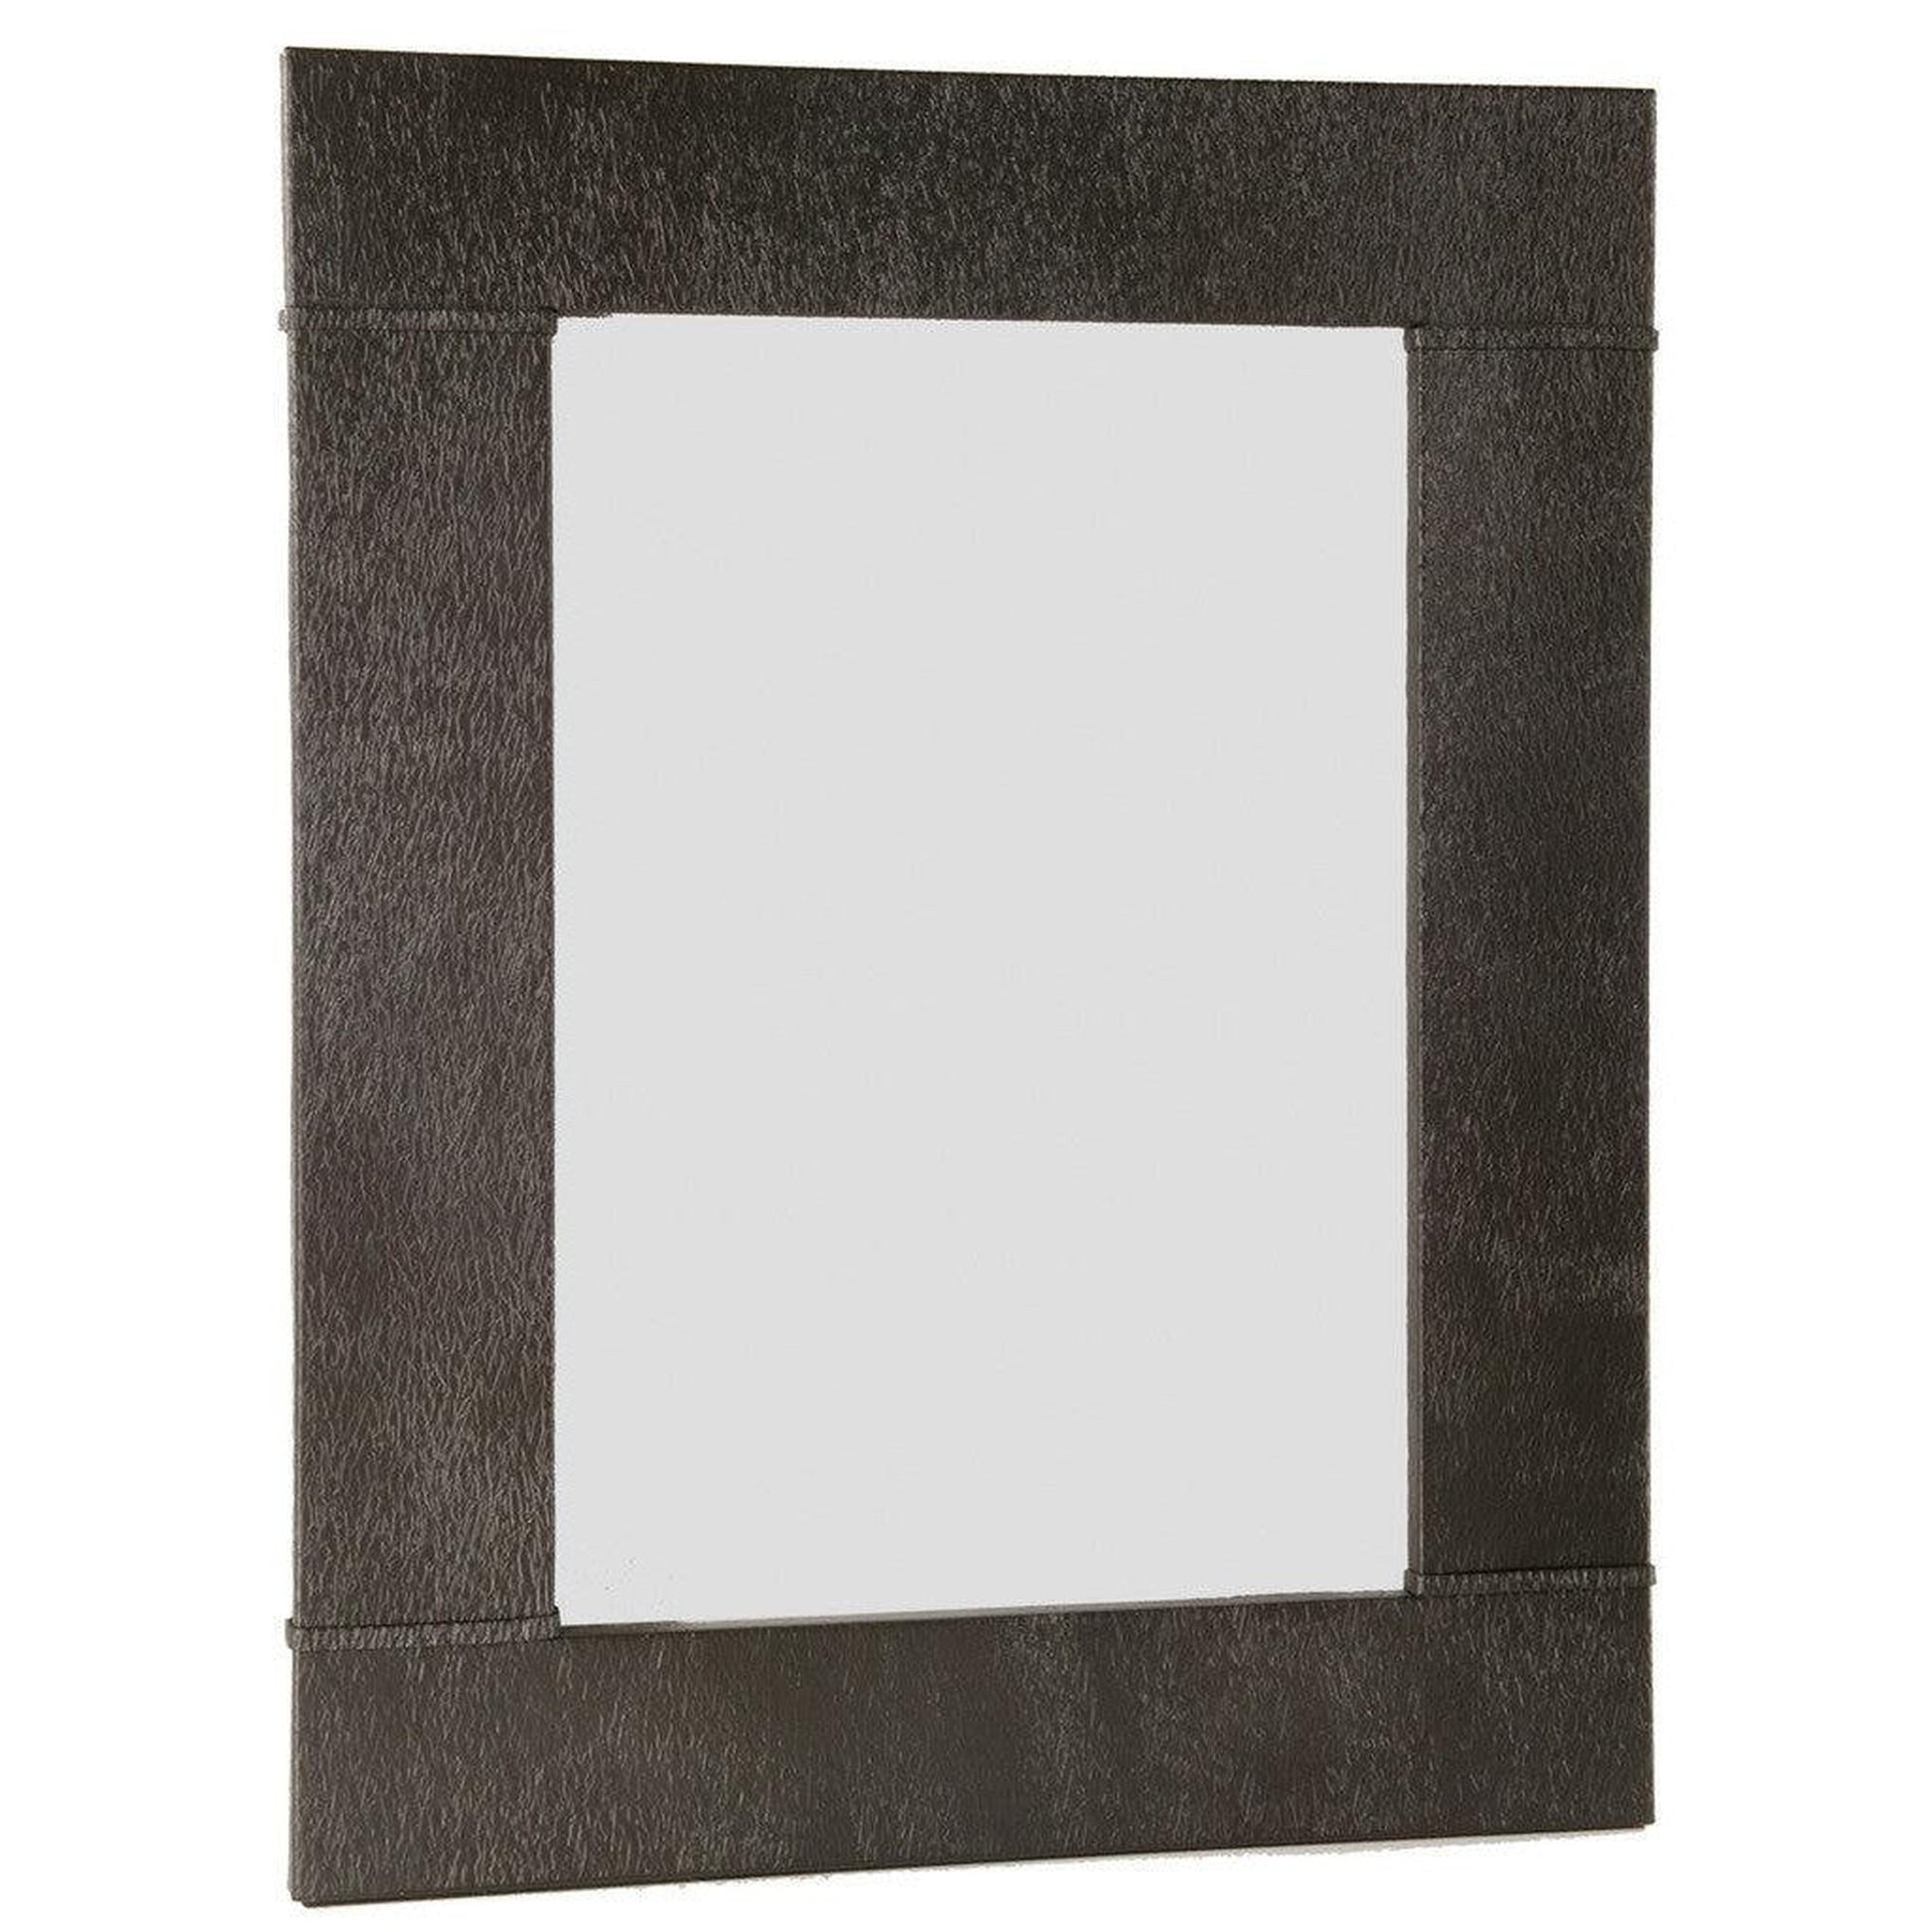 Stone County Ironworks Cedarvale 31" x 35" Small Hand Rubbed Bronze Iron Wall Mirror With Pewter Iron Accent